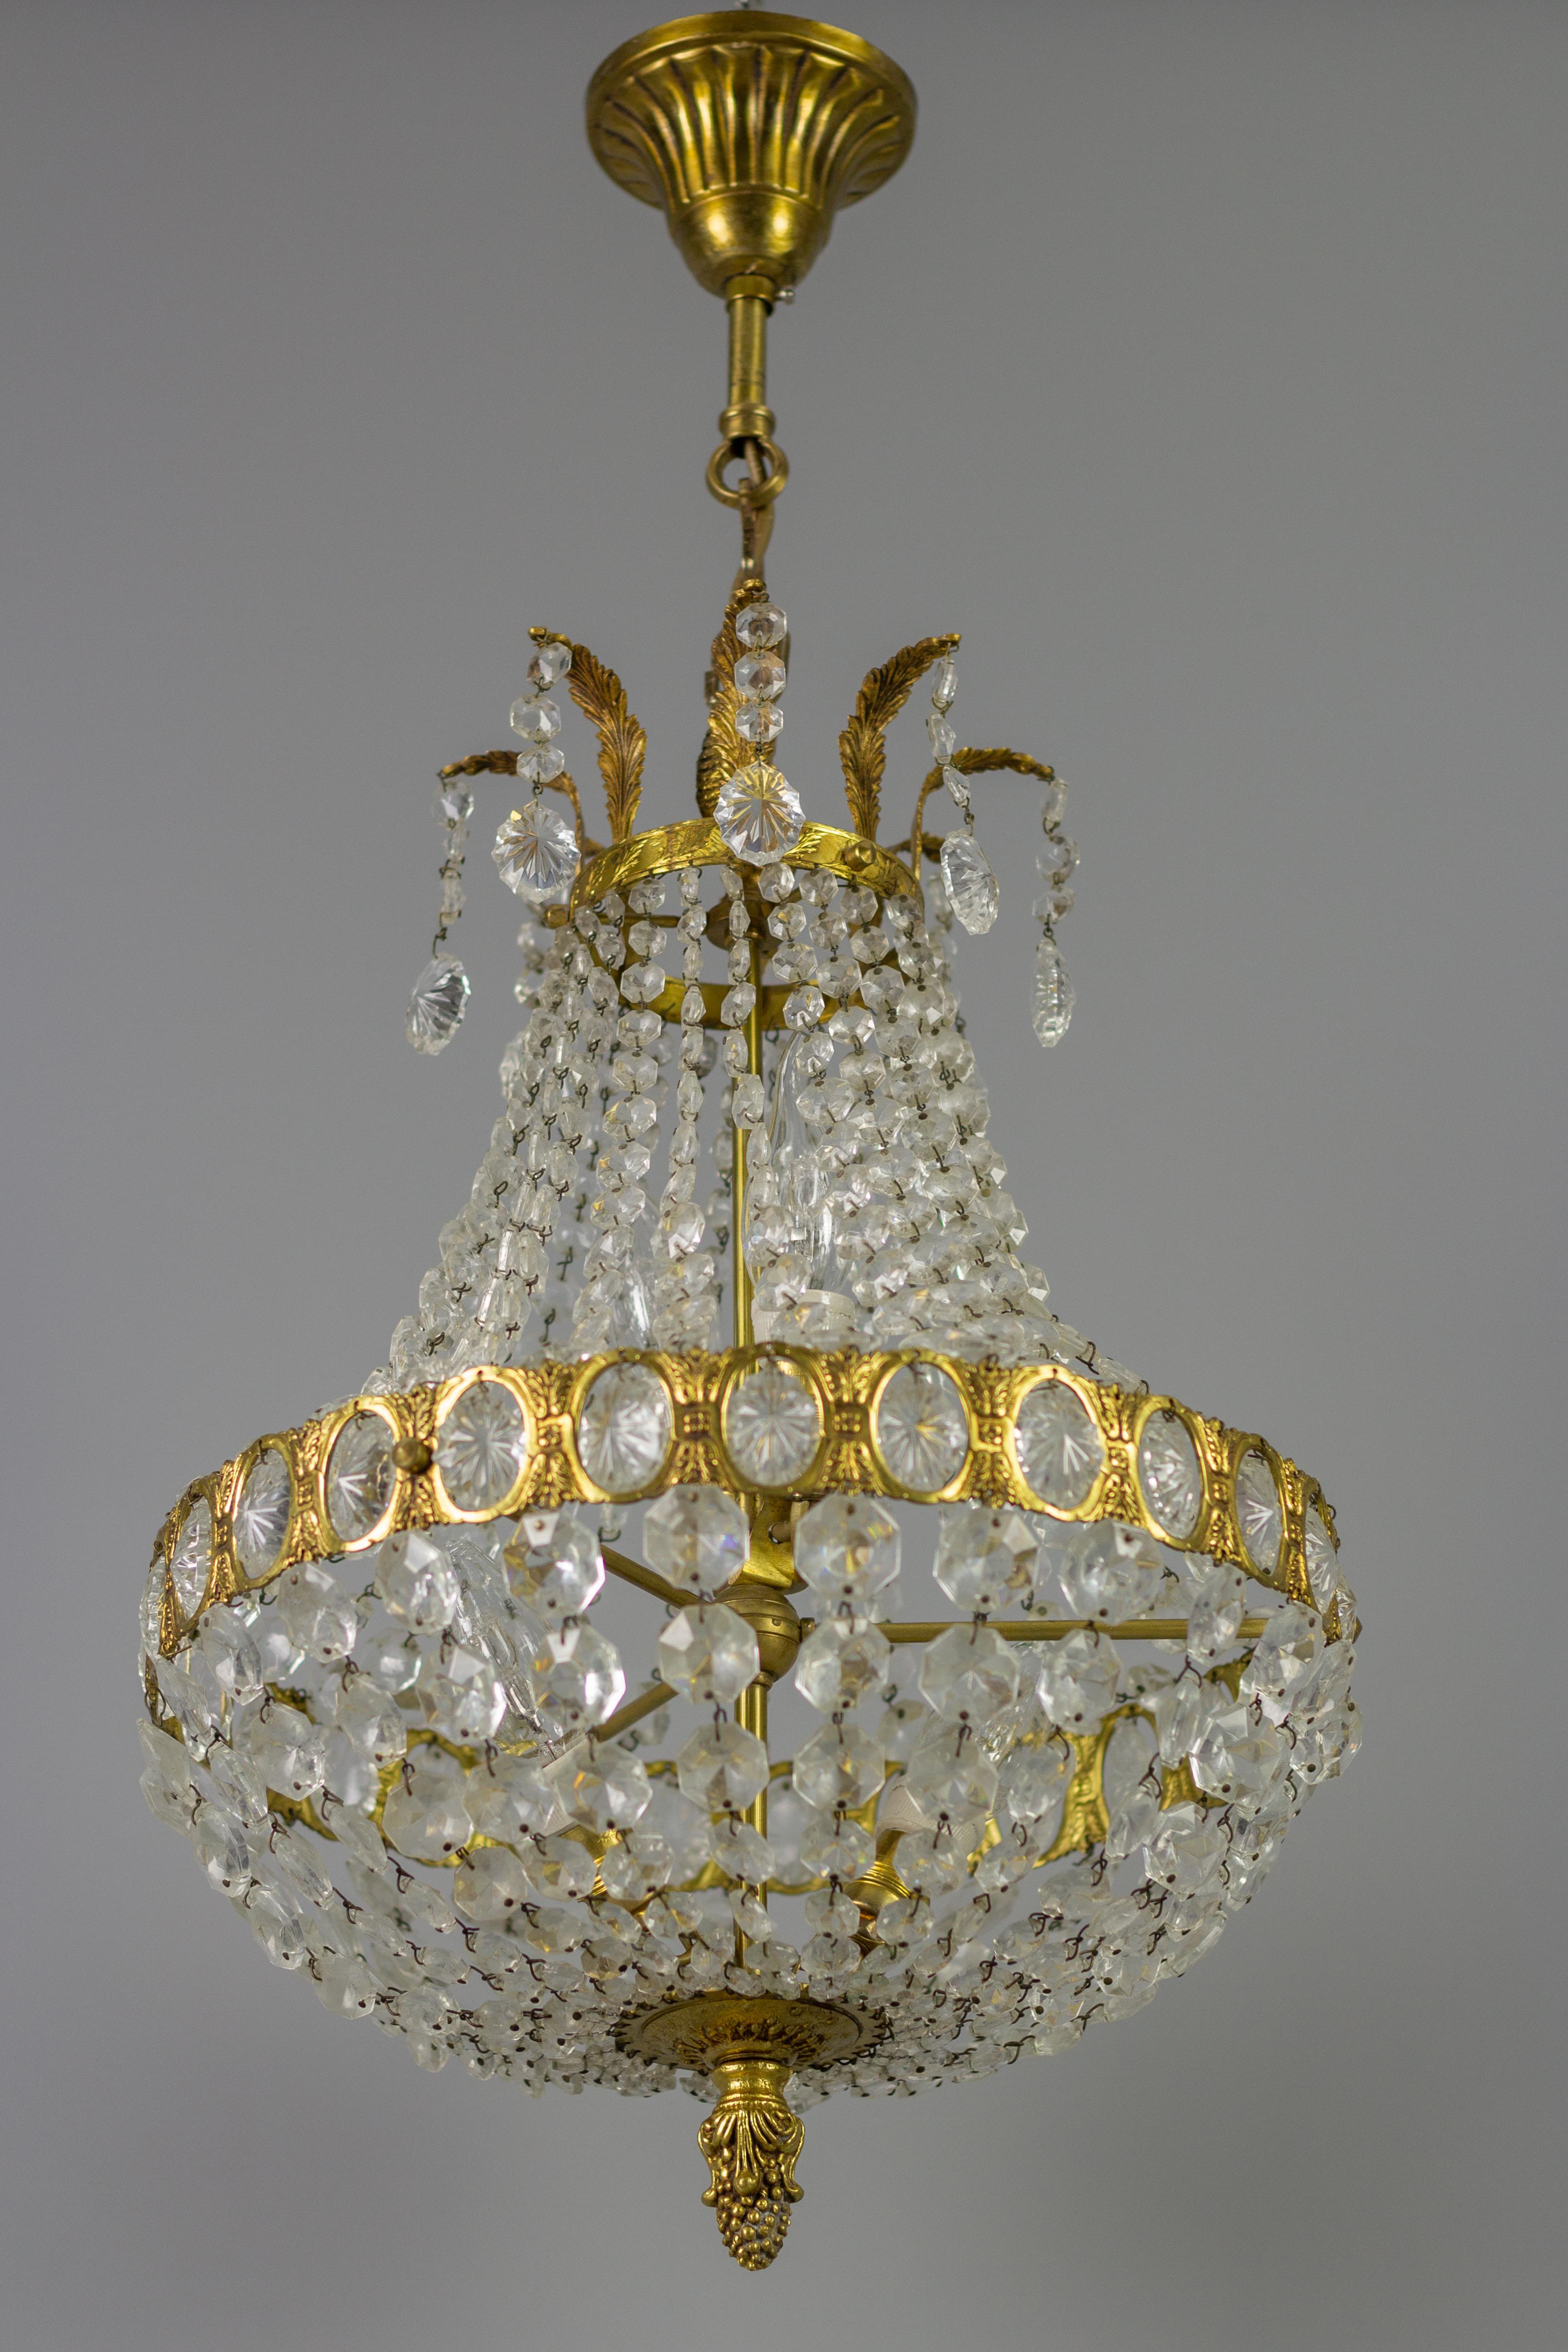 French Empire-style four-light crystal glass, brass, and bronze basket-shaped chandelier from the 1950s. This beautiful piece has decorative details made of bronze and a brass frame hung with chains of crystal glass beads forming a basket shape and